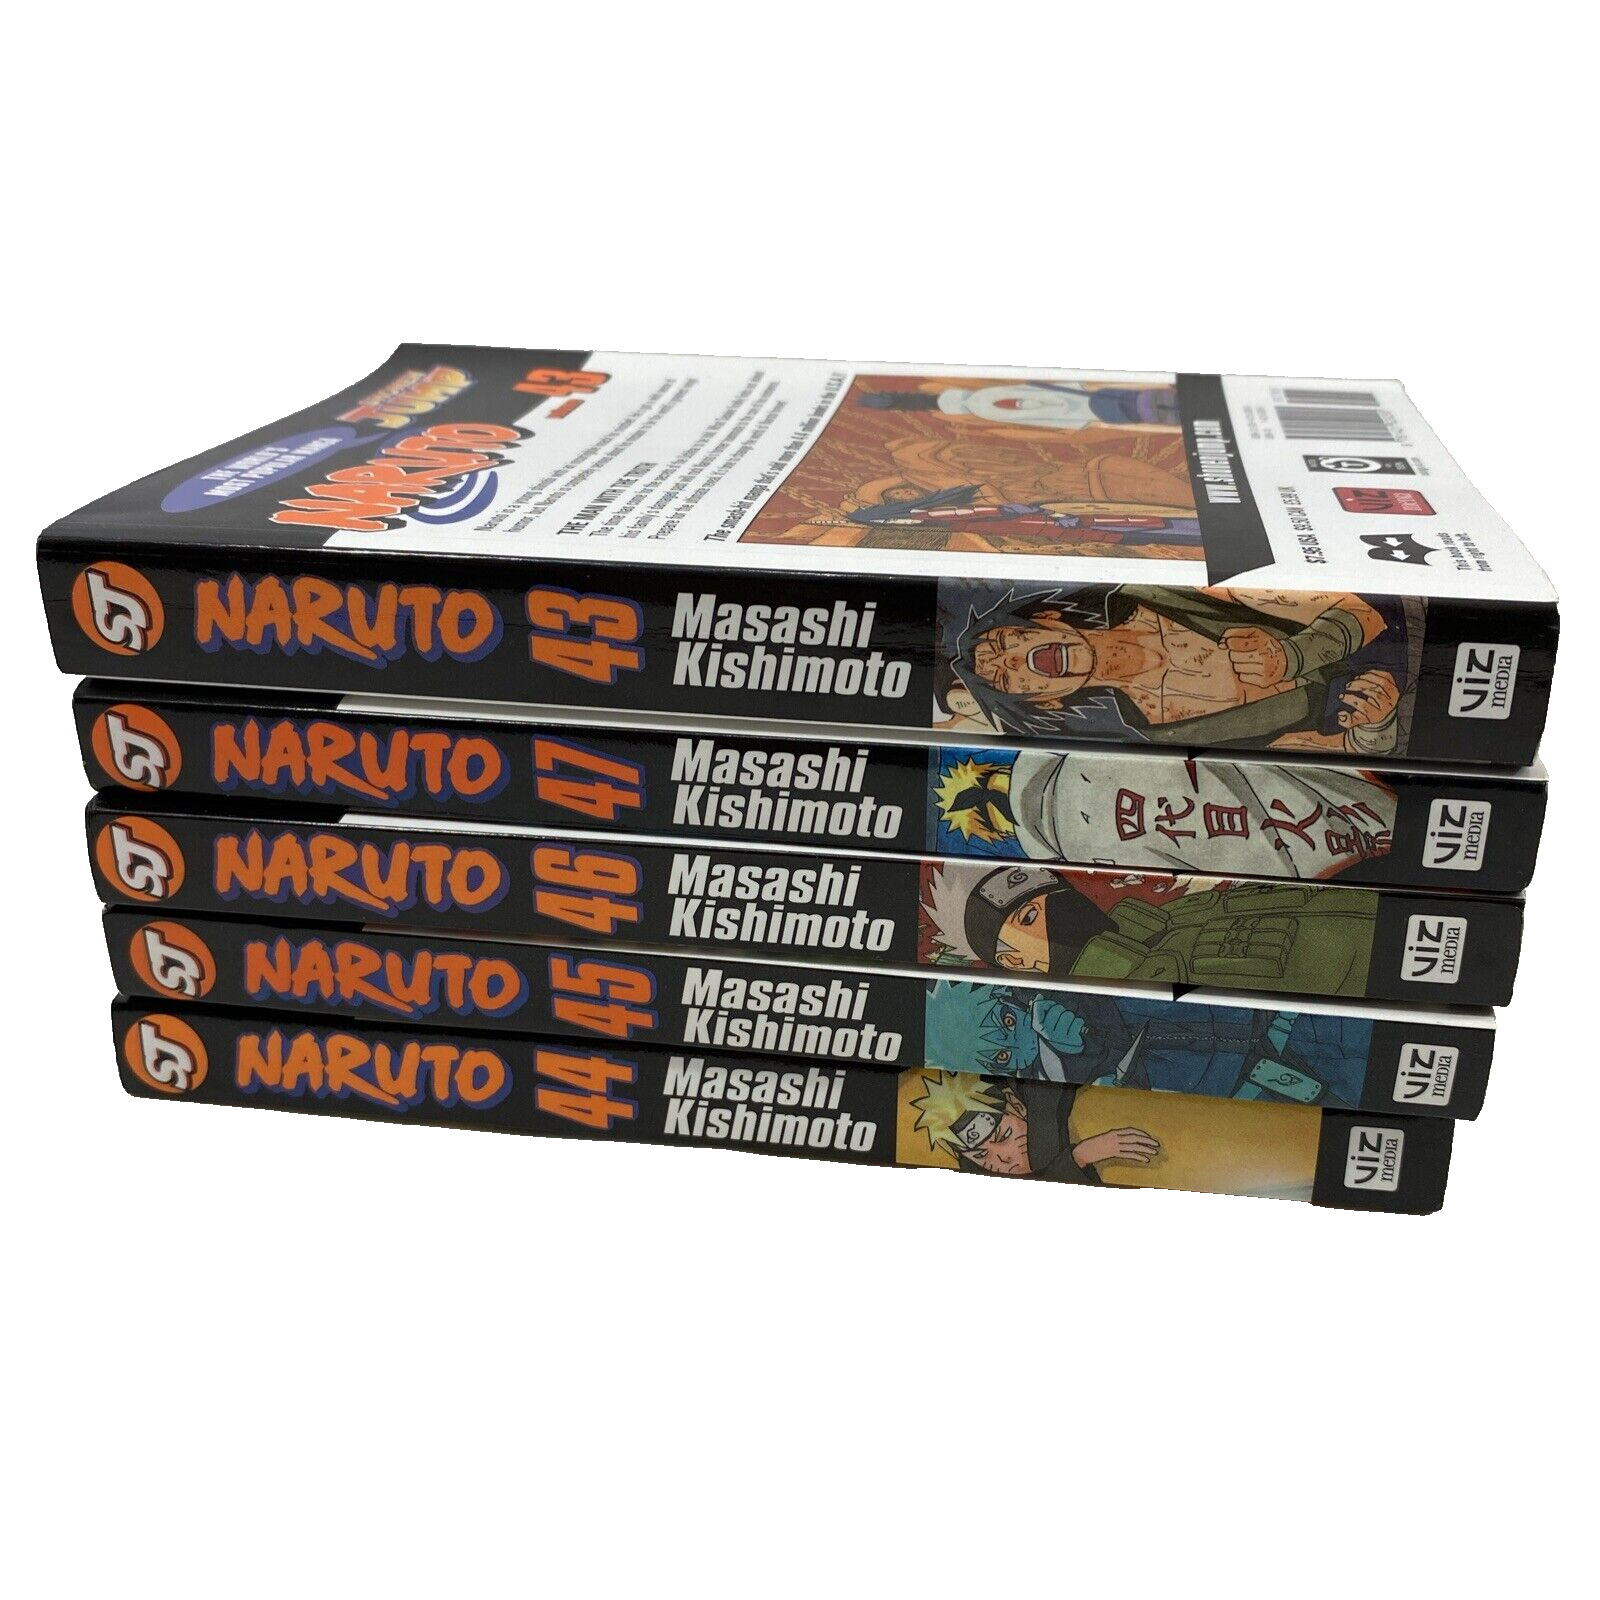 Lot of 5 Shonen Jump Naruto Manga Paperback Books Issues 43-47 Cards in 43 & 44